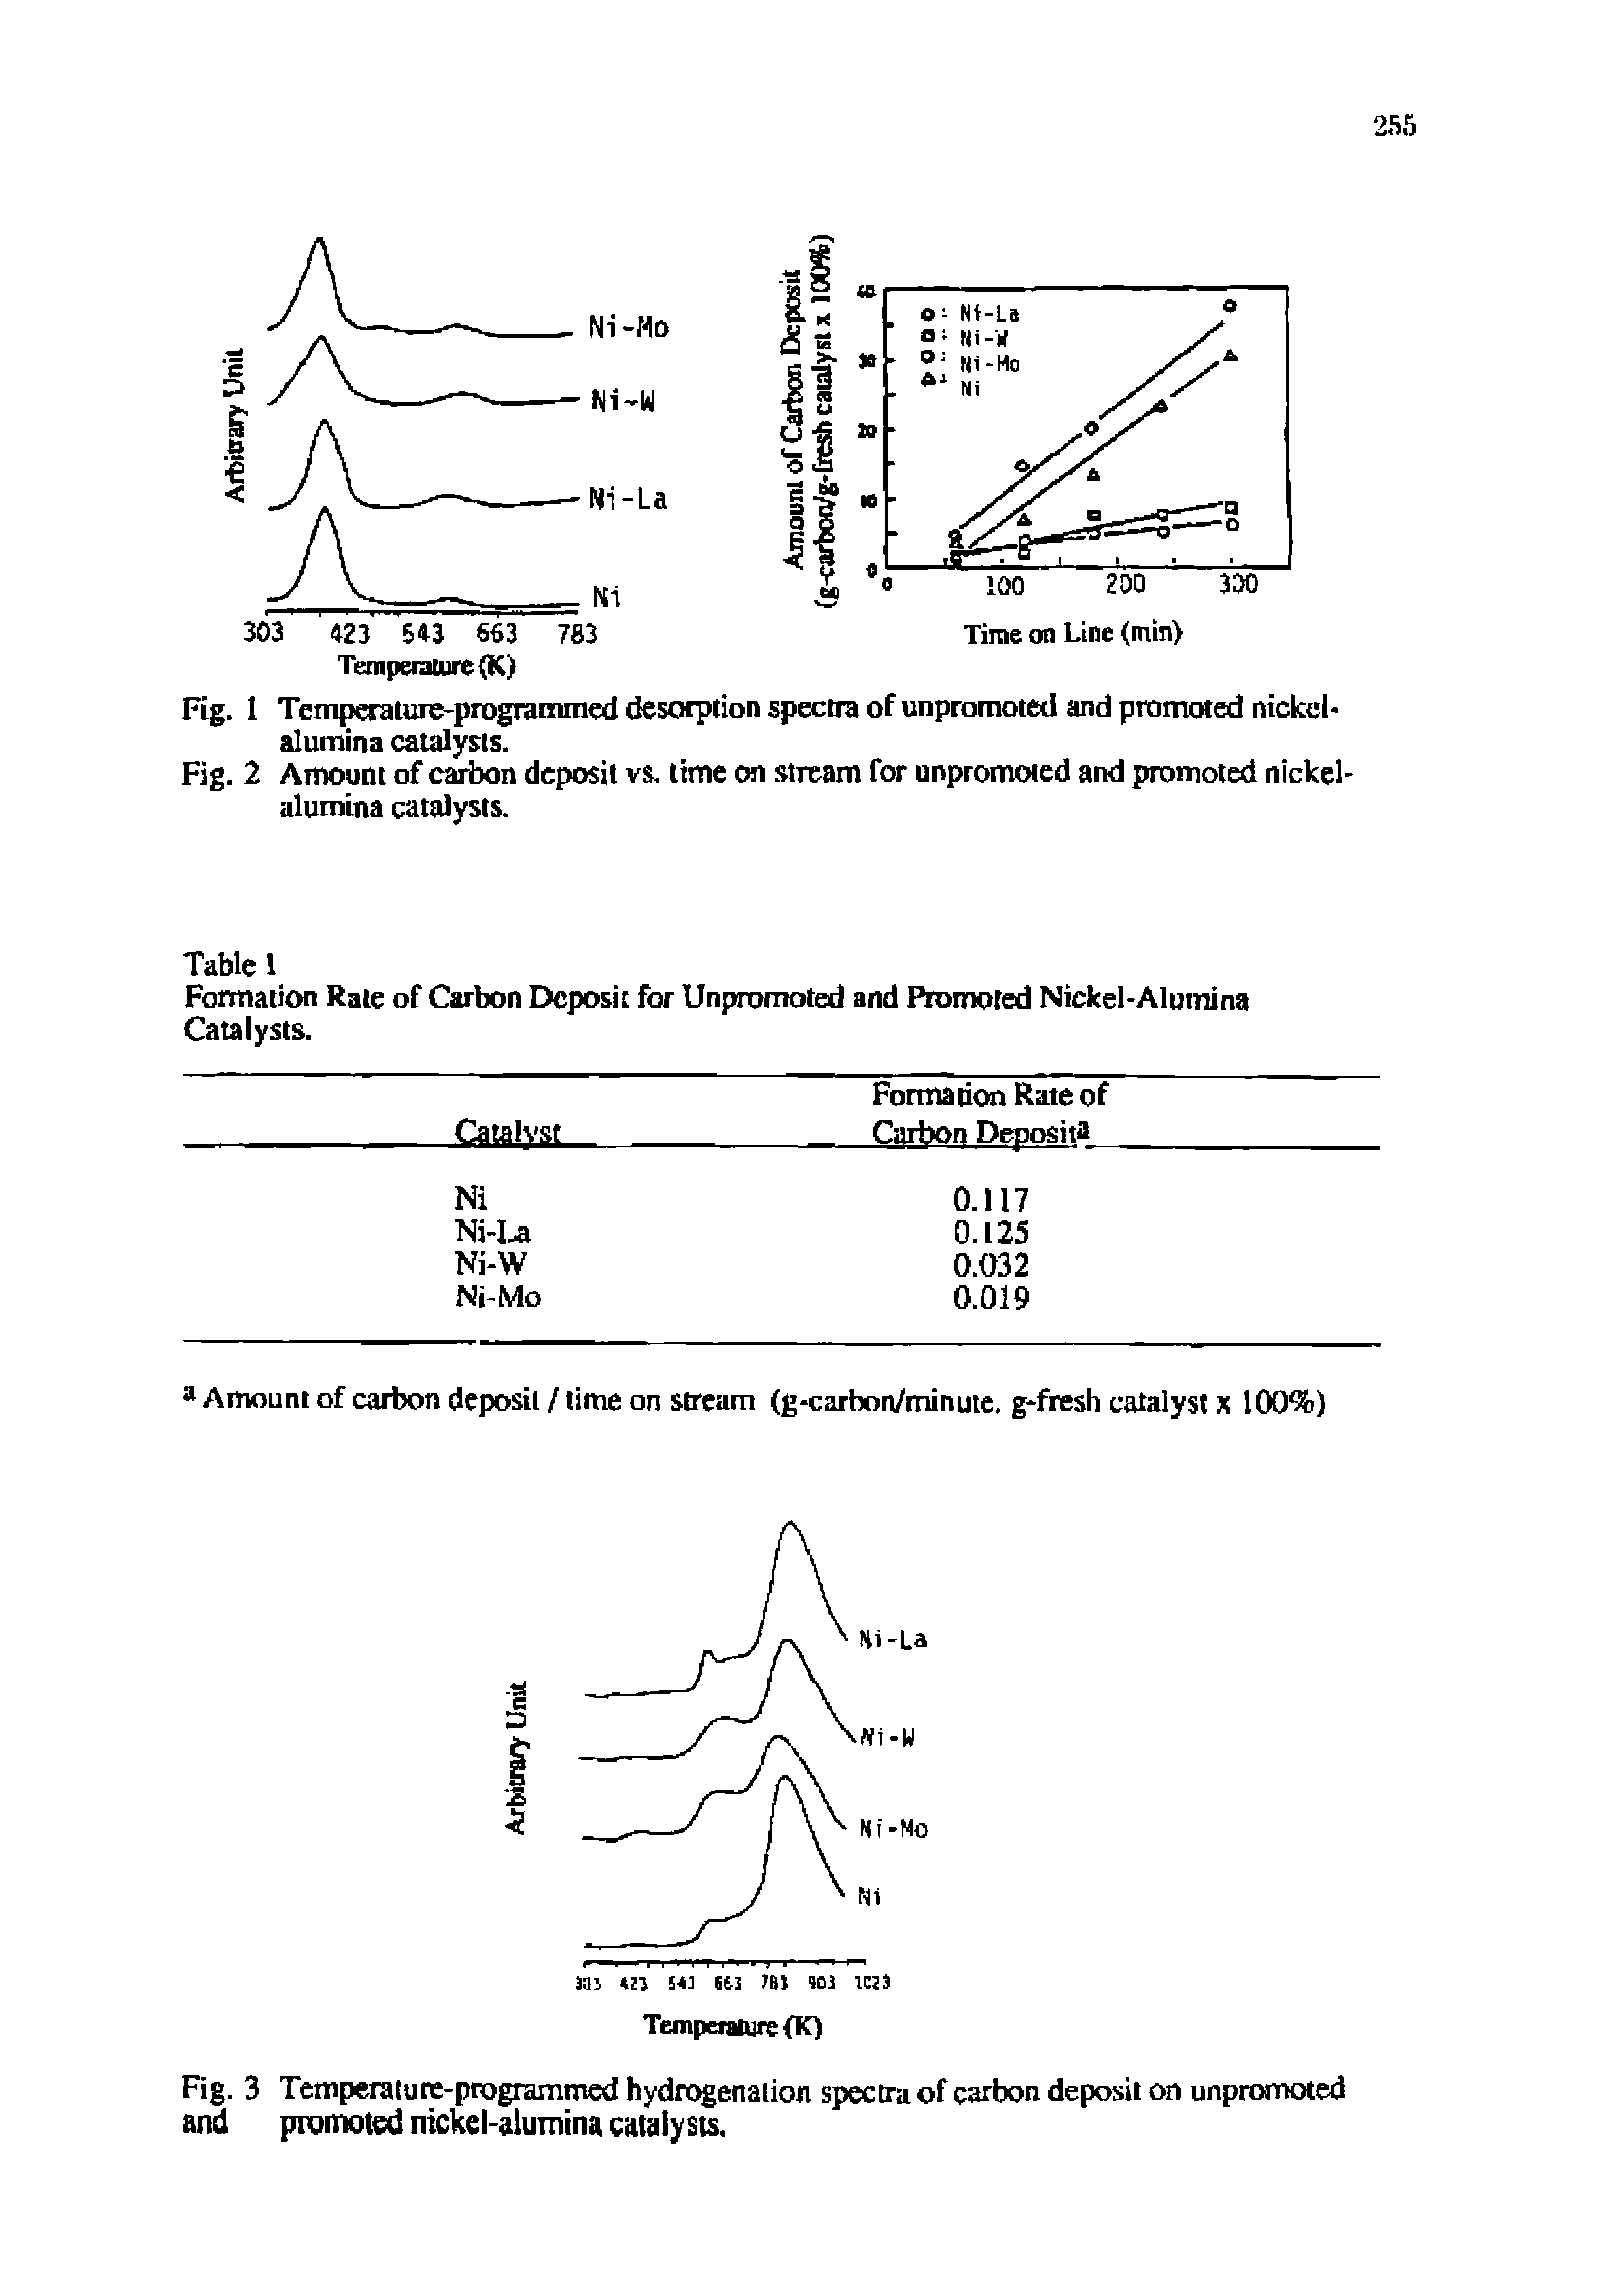 Fig. 1 Temperature-programmed desorption spectra of unpromoted and promoted nickel-alumina catalysts.